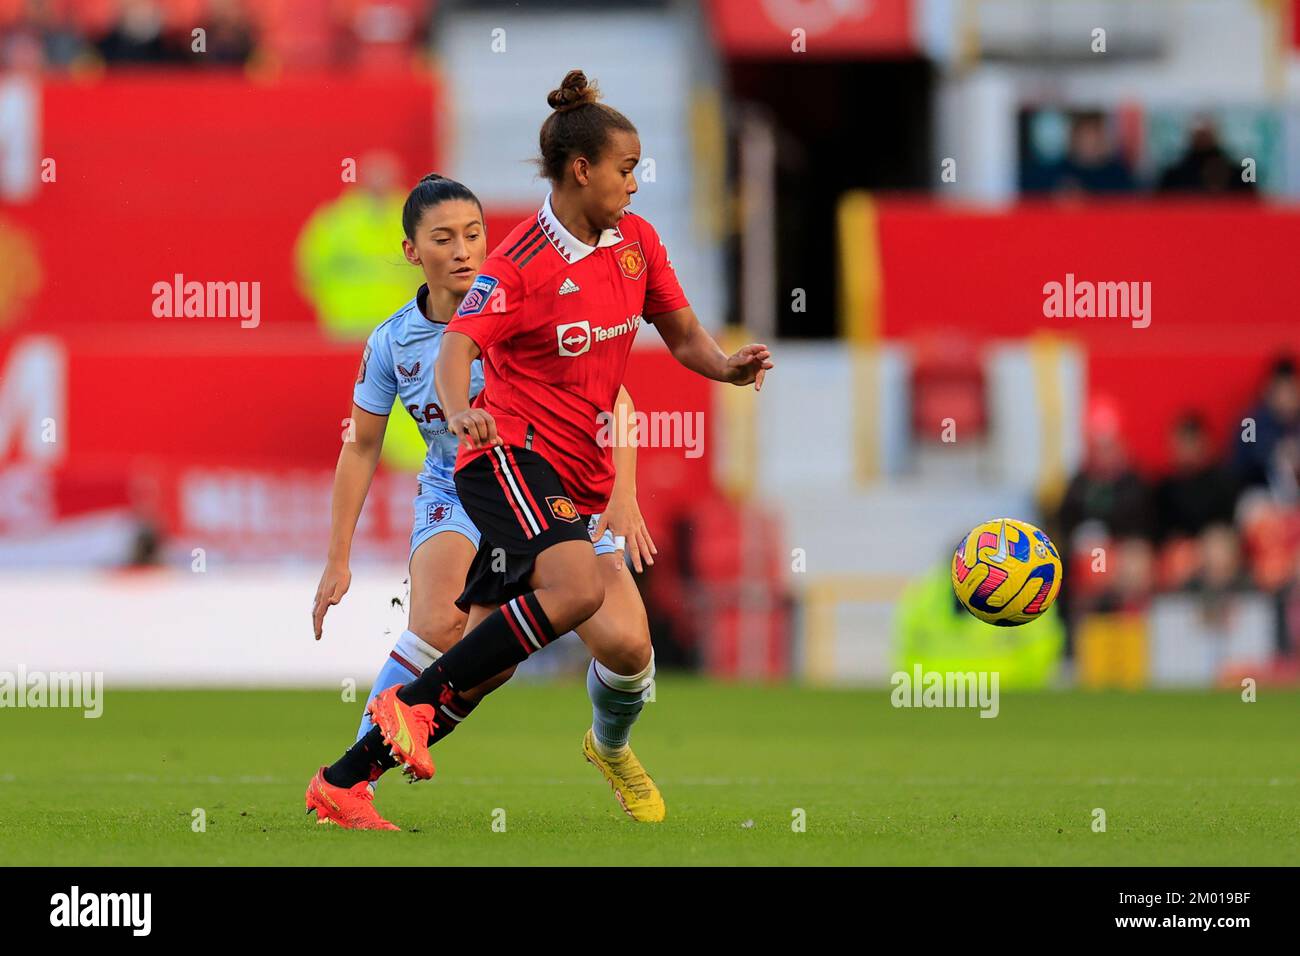 Nikita Parris #22 of Manchester United in action during The FA Women's Super League match Manchester United Women vs Aston Villa Women at Old Trafford, Manchester, United Kingdom, 3rd December 2022  (Photo by Conor Molloy/News Images) Stock Photo